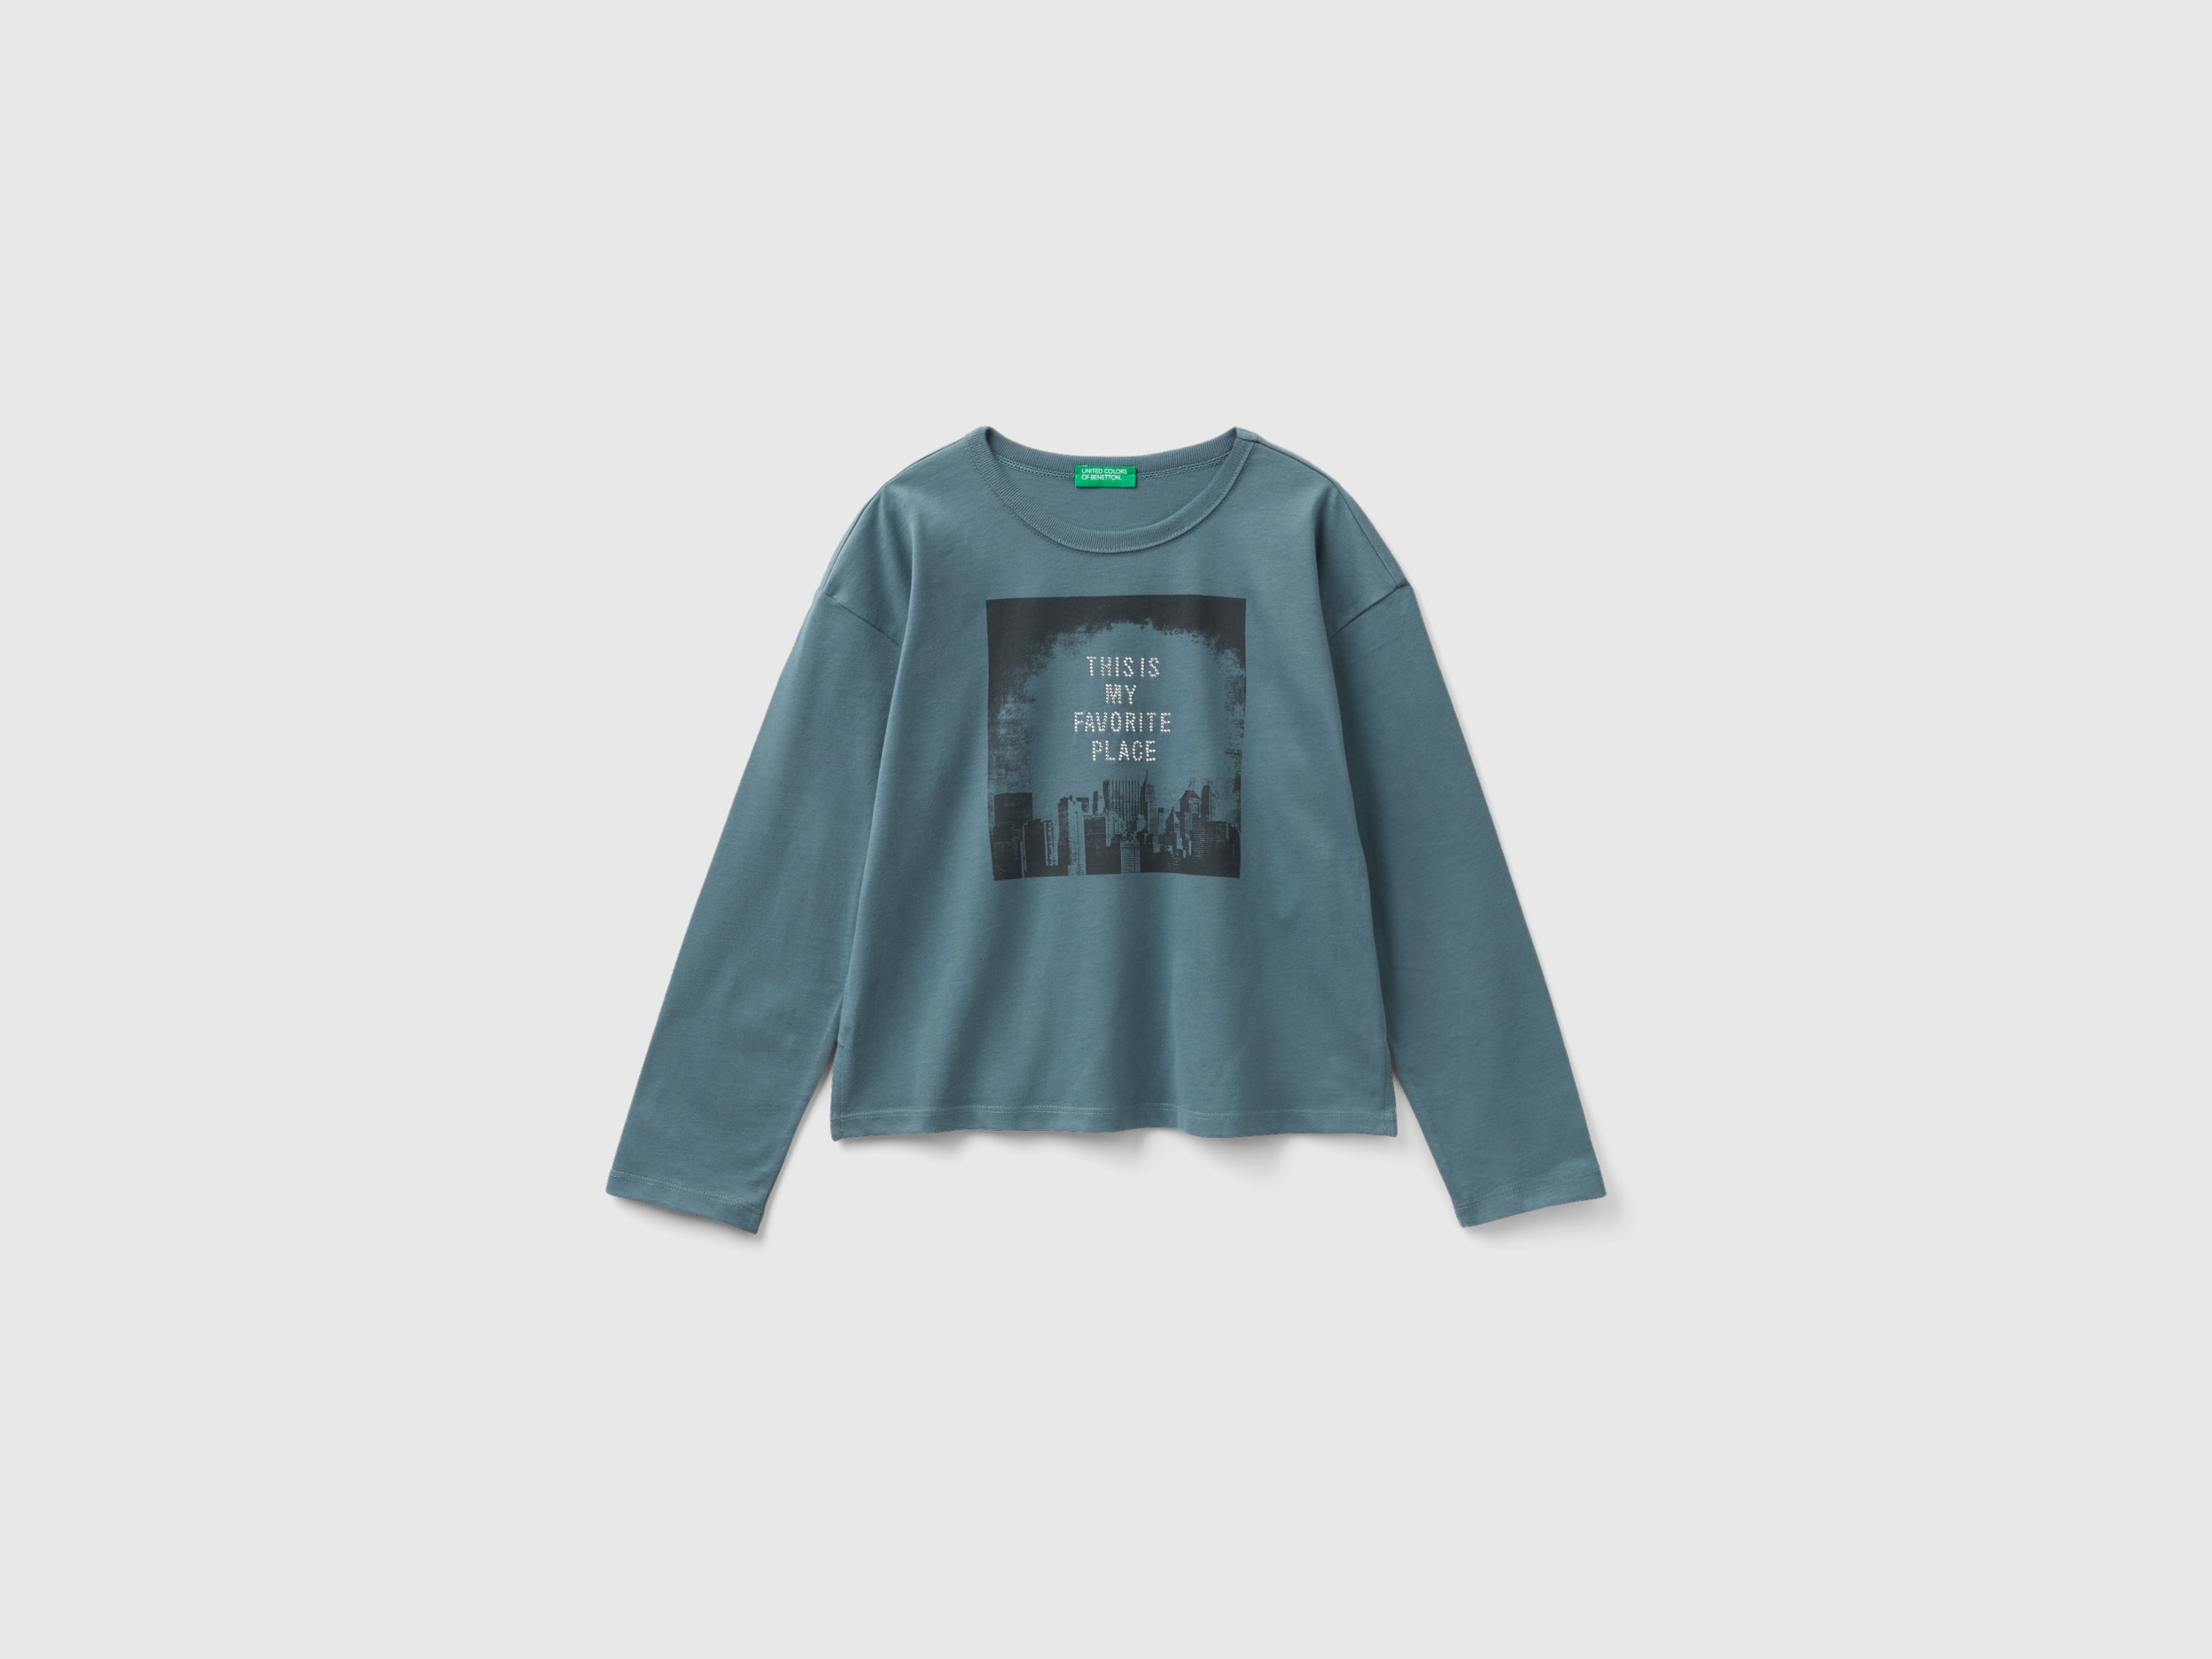 Benetton, T-shirt With Print And Studs, size S, Teal, Kids